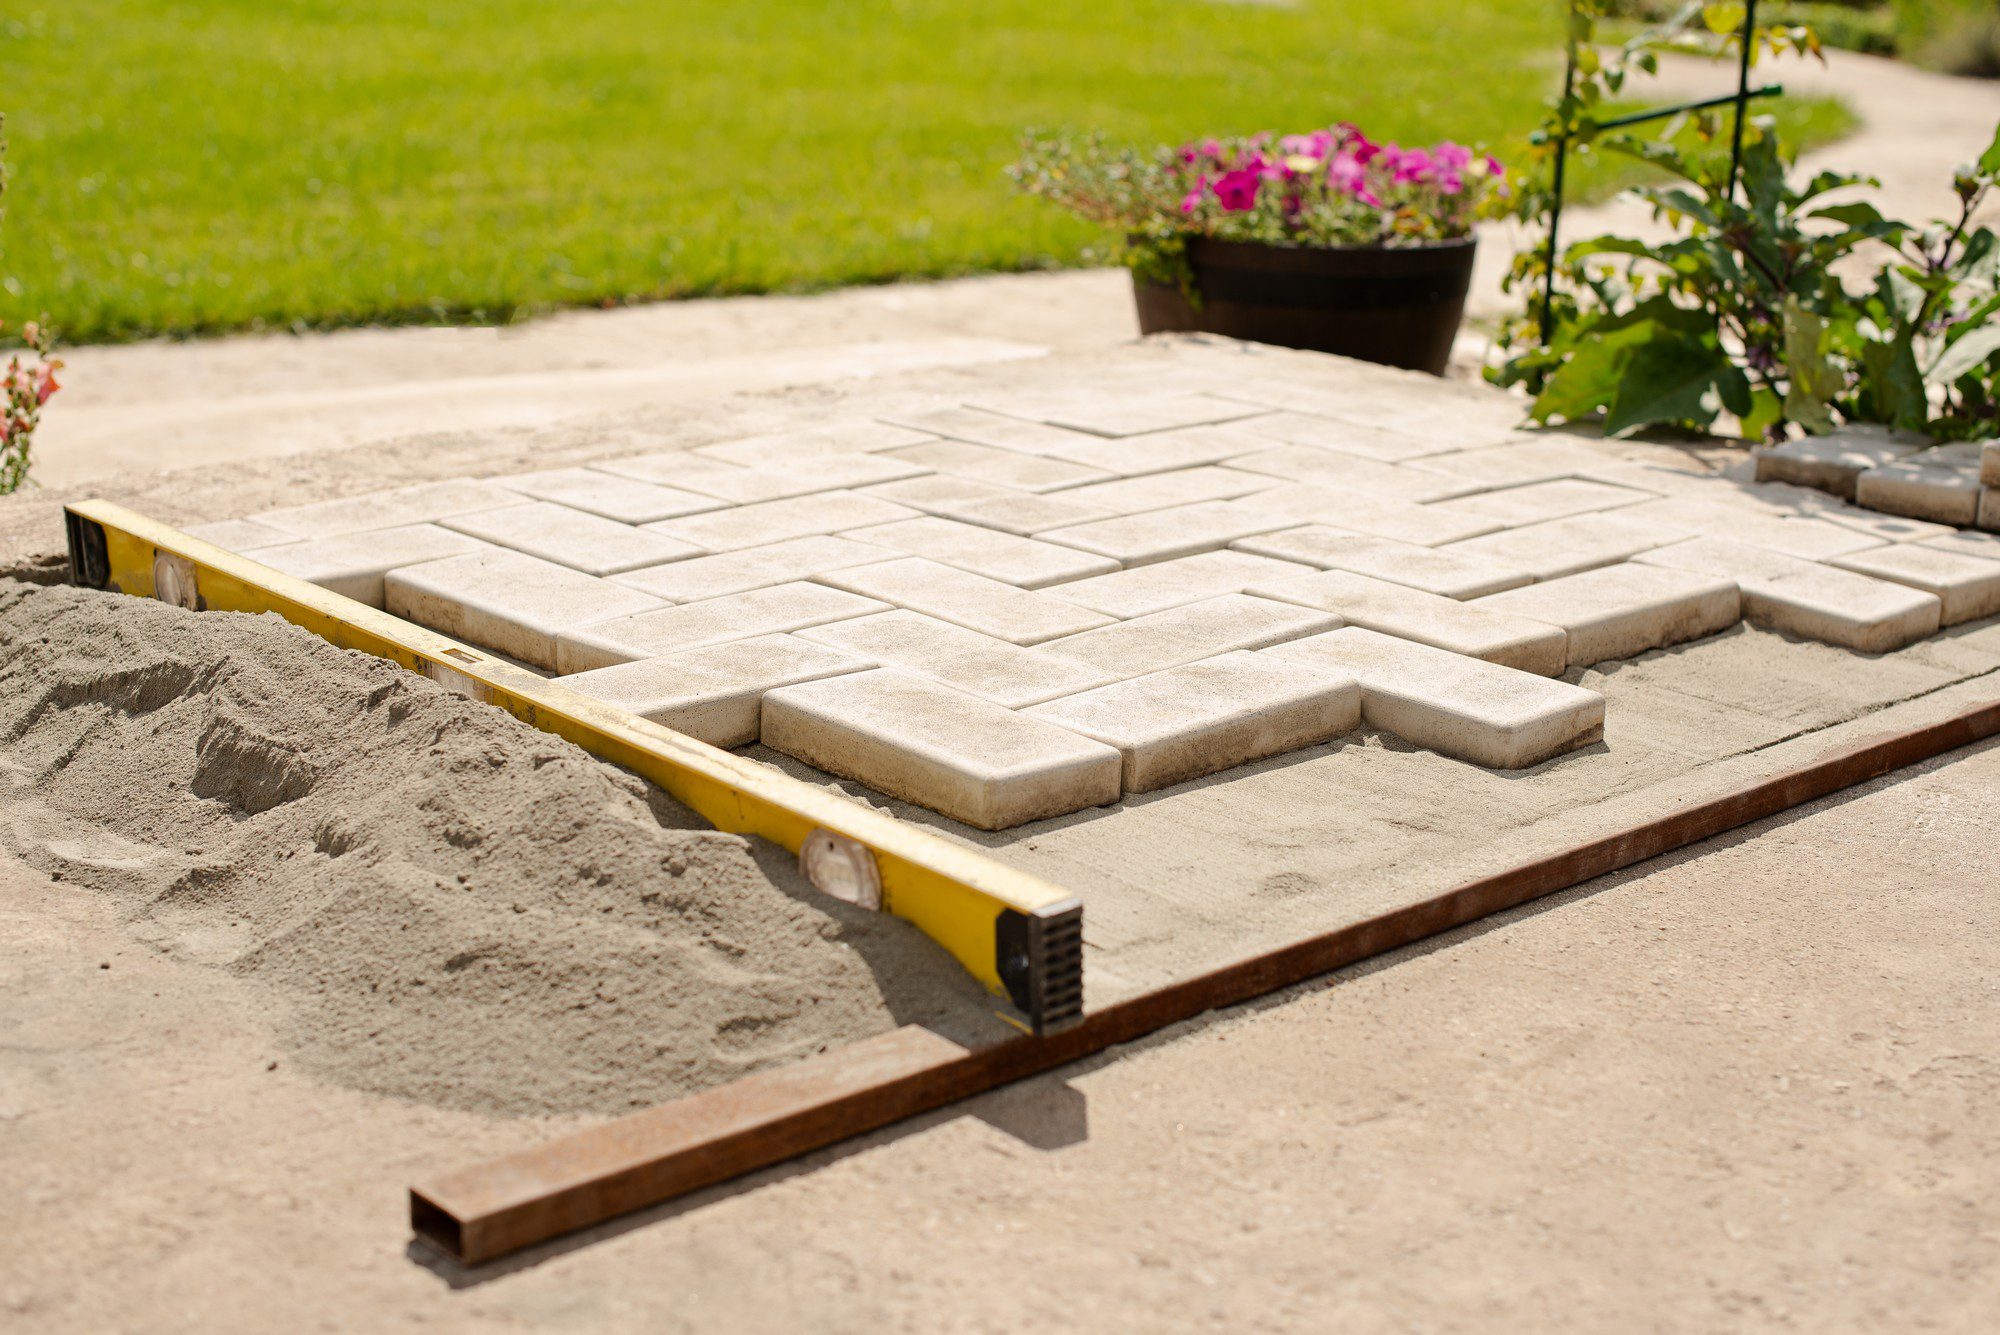 The image shows a section of a paved area, which appears to be under construction or renovation. There are uniform, rectangular paving stones laid out in a pattern on a bed of sand. Part of the pavement seems completed, while other stones are stacked and yet to be placed. A yellow level tool rests atop the stones to ensure that the surface is flat and even. On the left, there's a pile of sand, likely used as a base layer for the pavers. In the background, you can see a well-manicured lawn and a potted plant with pink flowers, indicating a garden or a landscaped area. The presence of the level tool and the orderly laying of the stones suggest that this is a carefully planned and executed landscaping project.